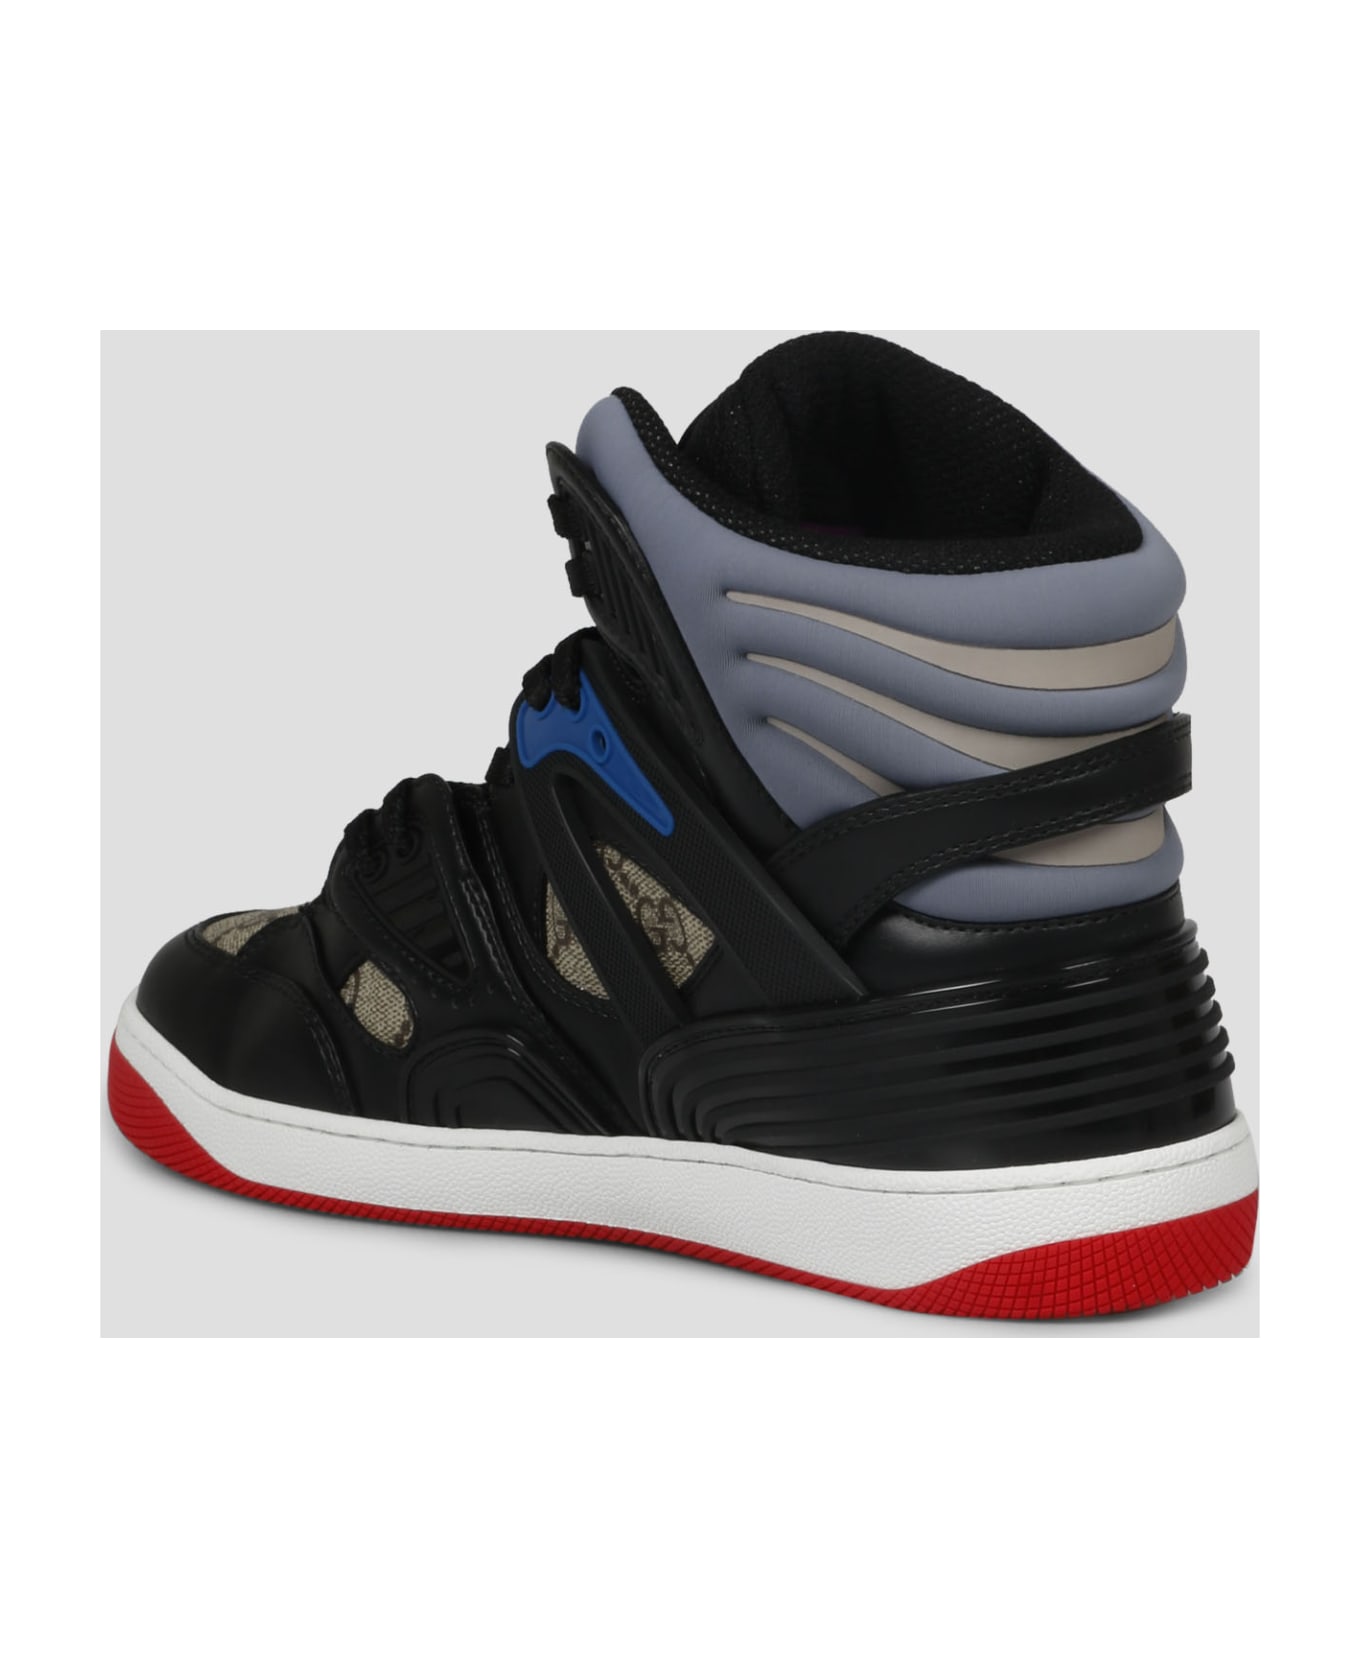 Gucci High Top Sneakers - Black